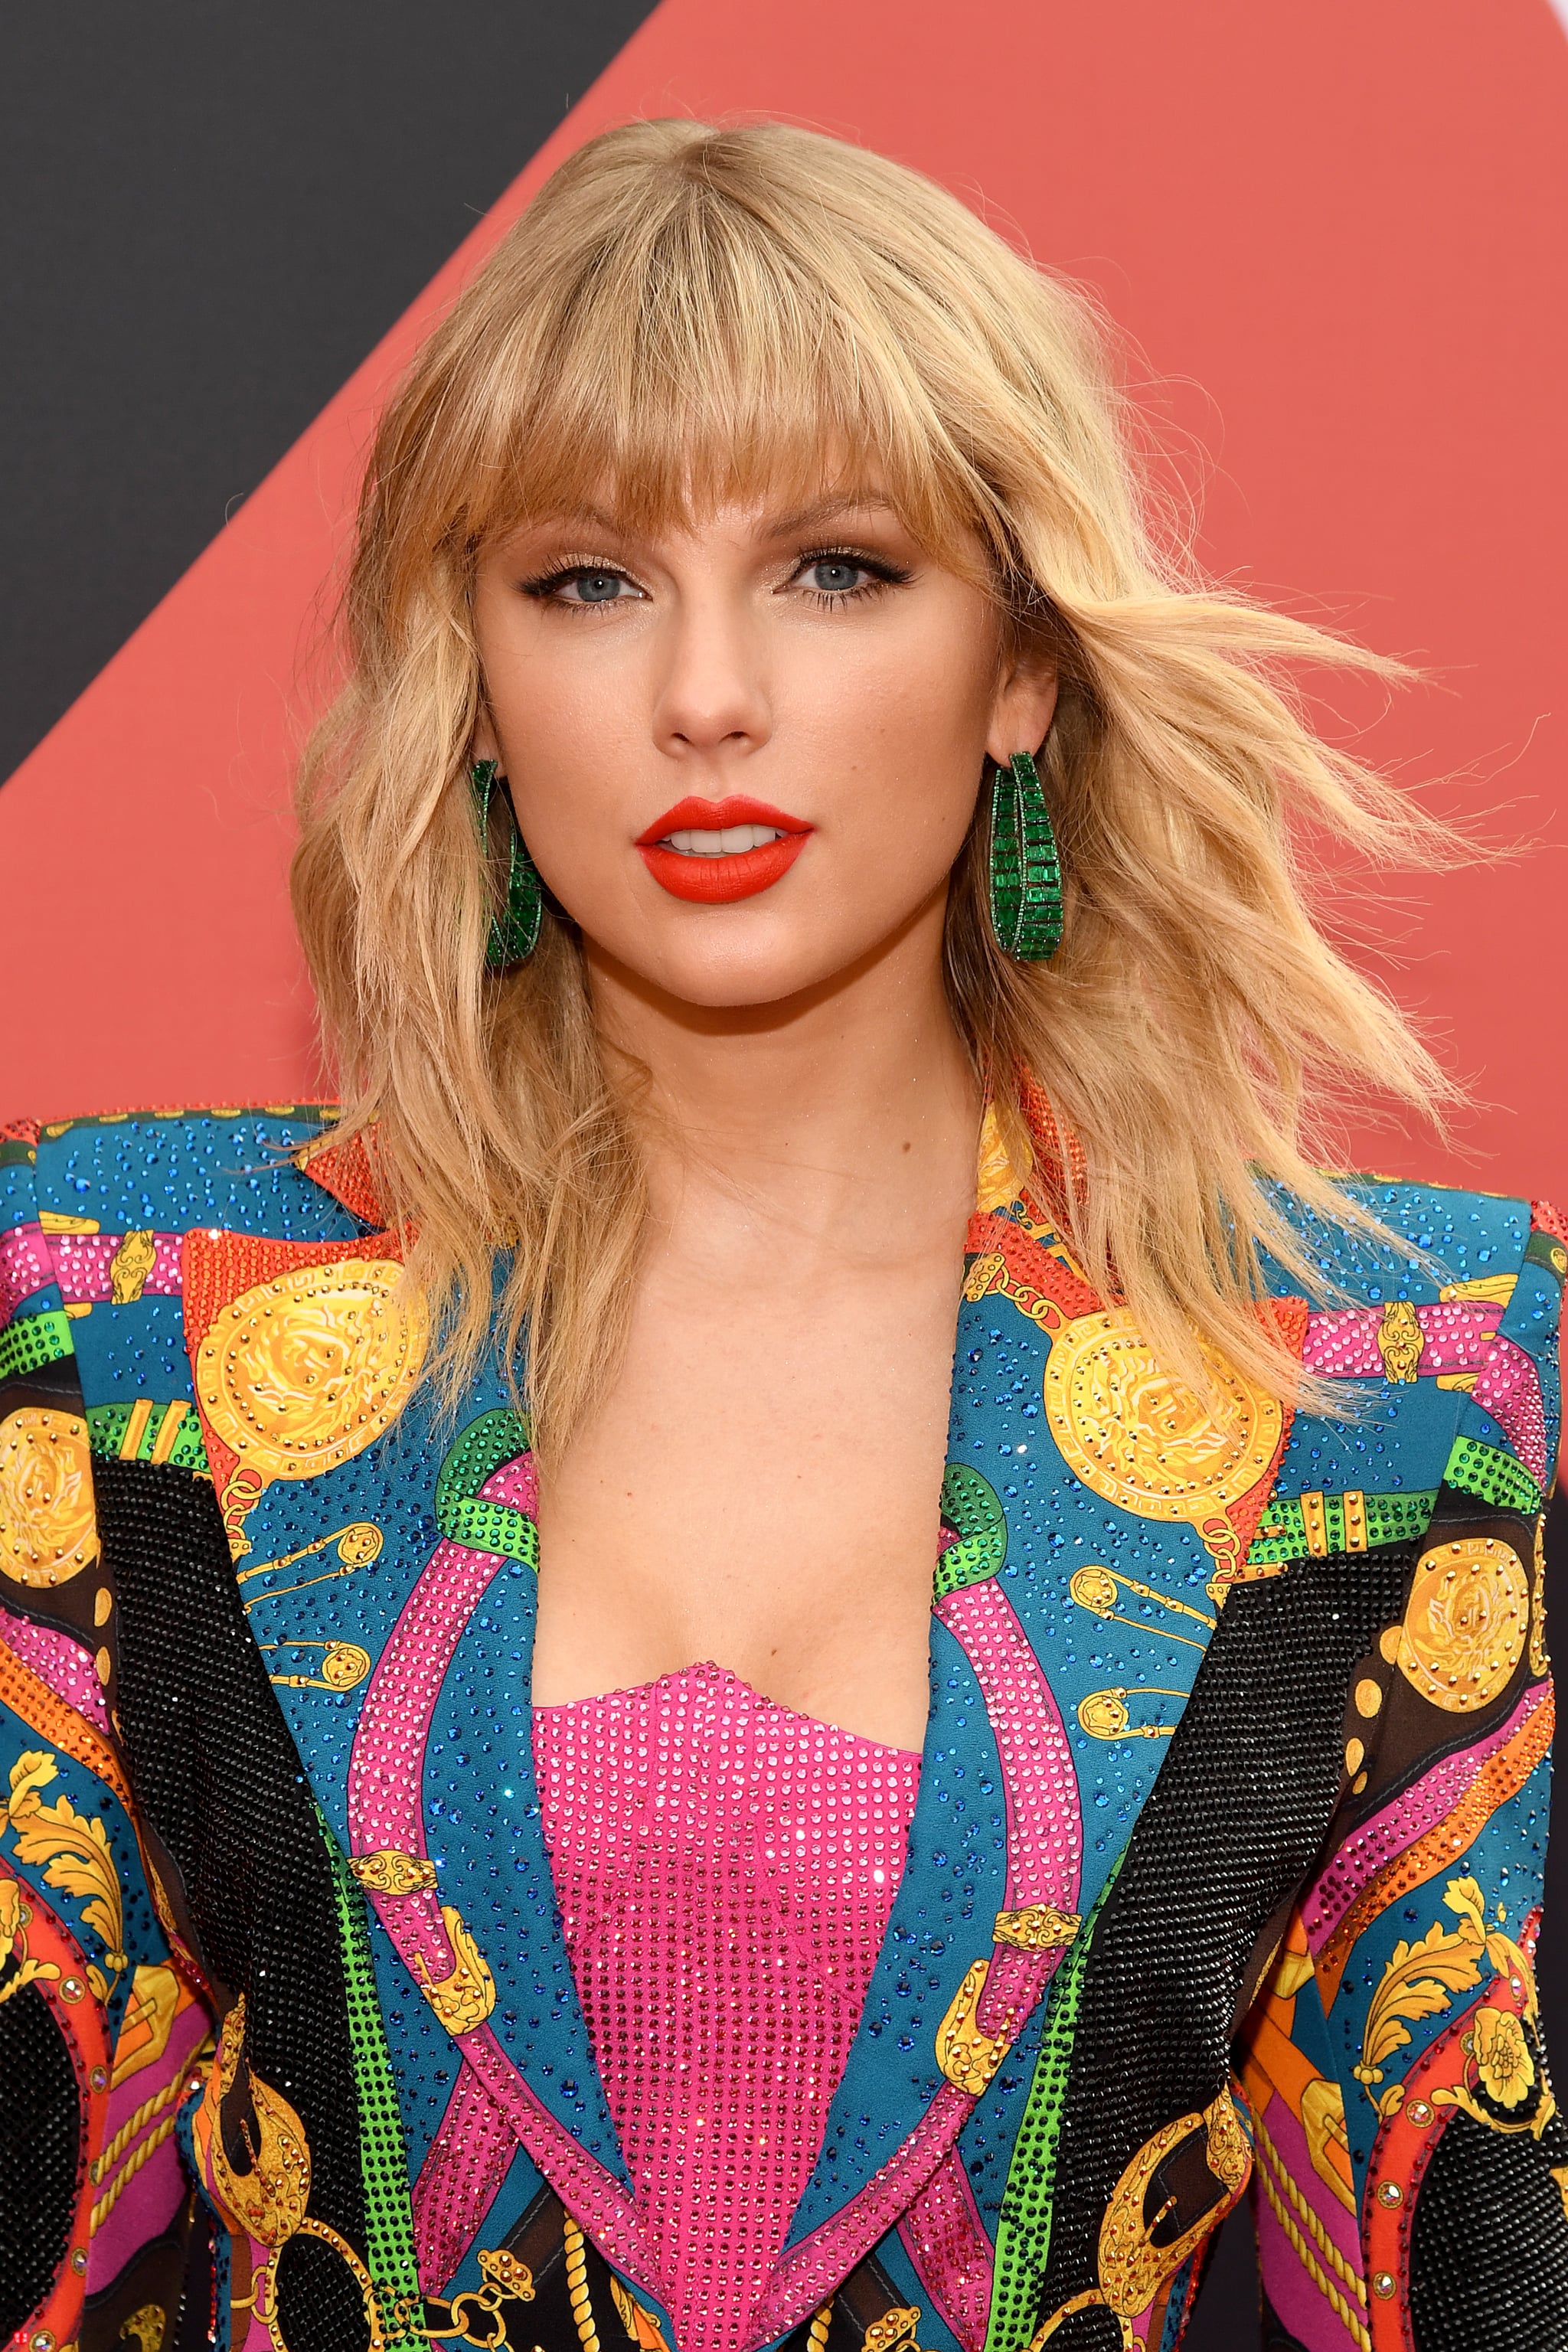 NEWARK, NEW JERSEY - AUGUST 26: Taylor Swift attends the 2019 MTV Video Music Awards at Prudential Centre on August 26, 2019 in Newark, New Jersey. (Photo by Kevin Mazur/WireImage)